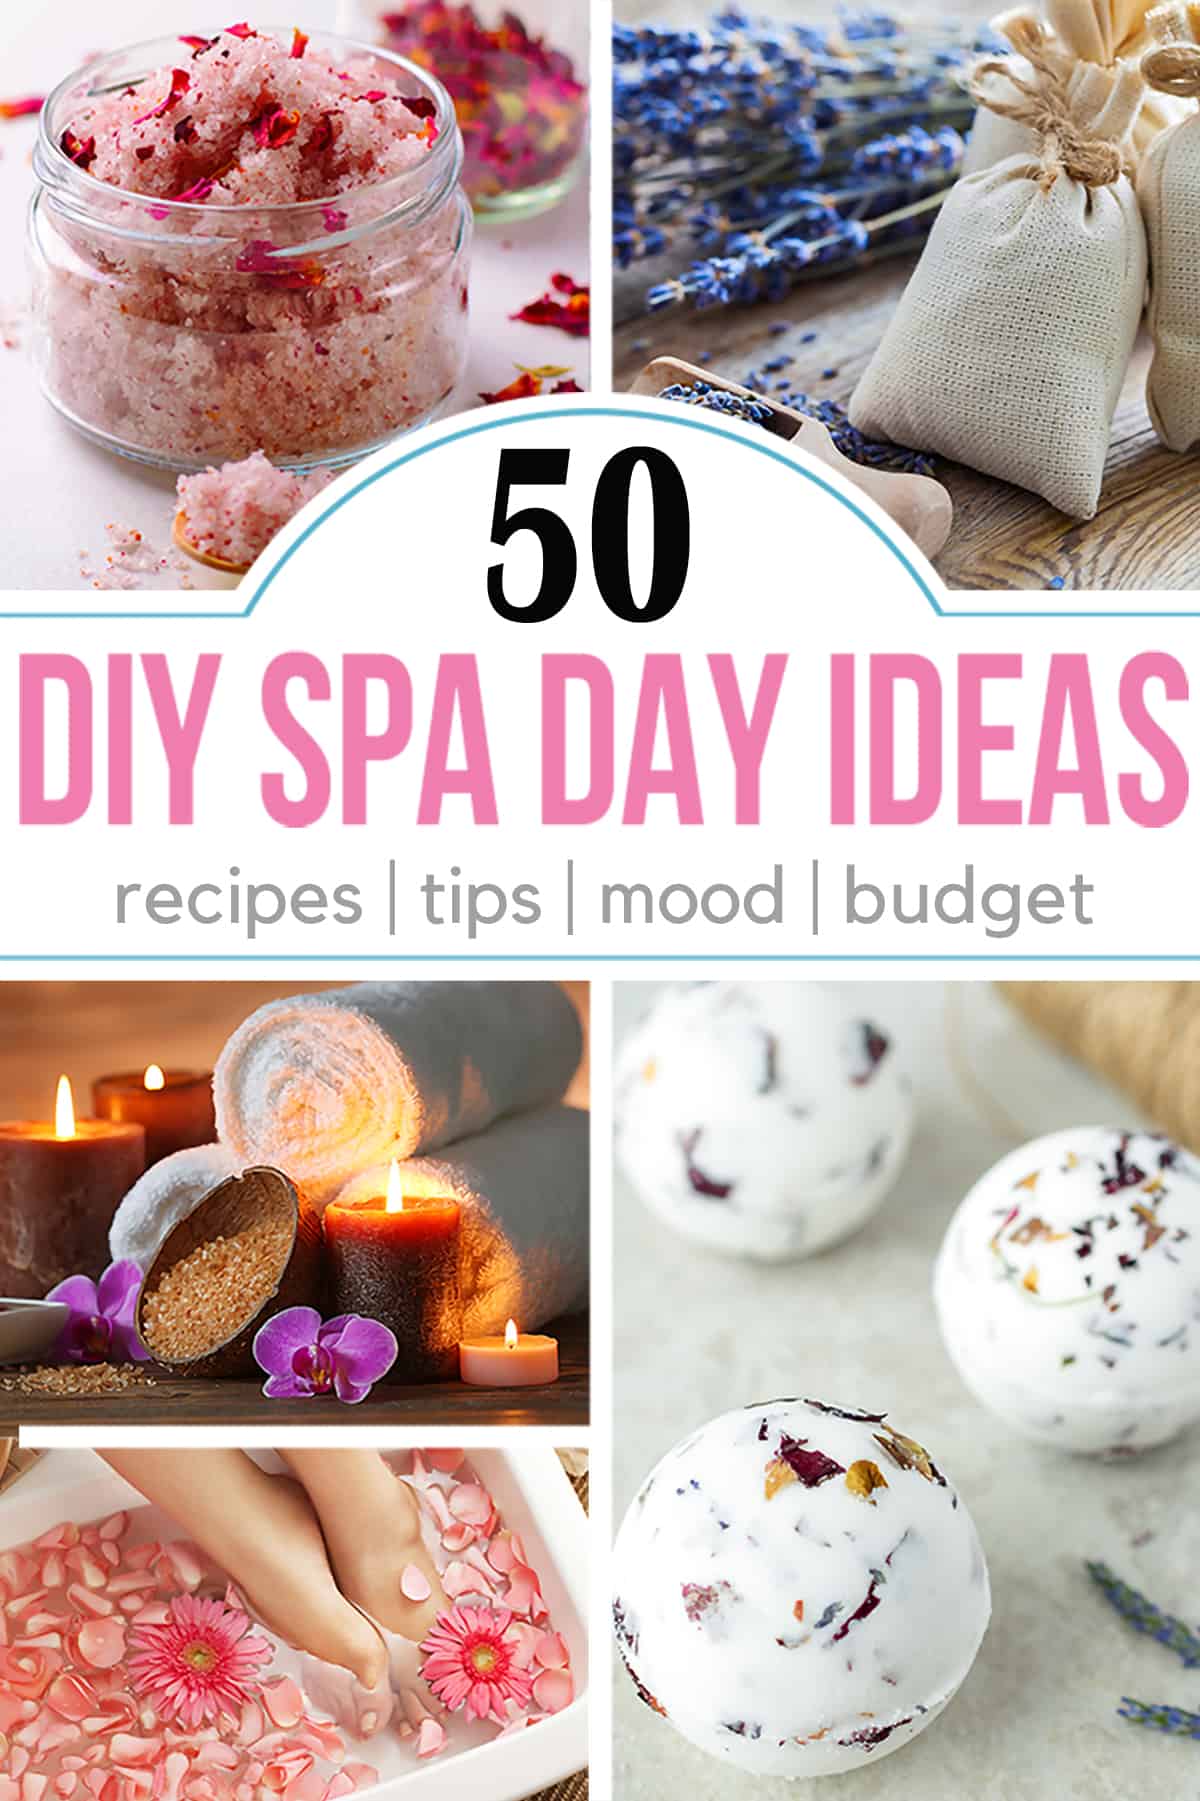 Collage of spa day ideas including a foot bath, rose salt scrub, lavender sachets, and bath bombs.